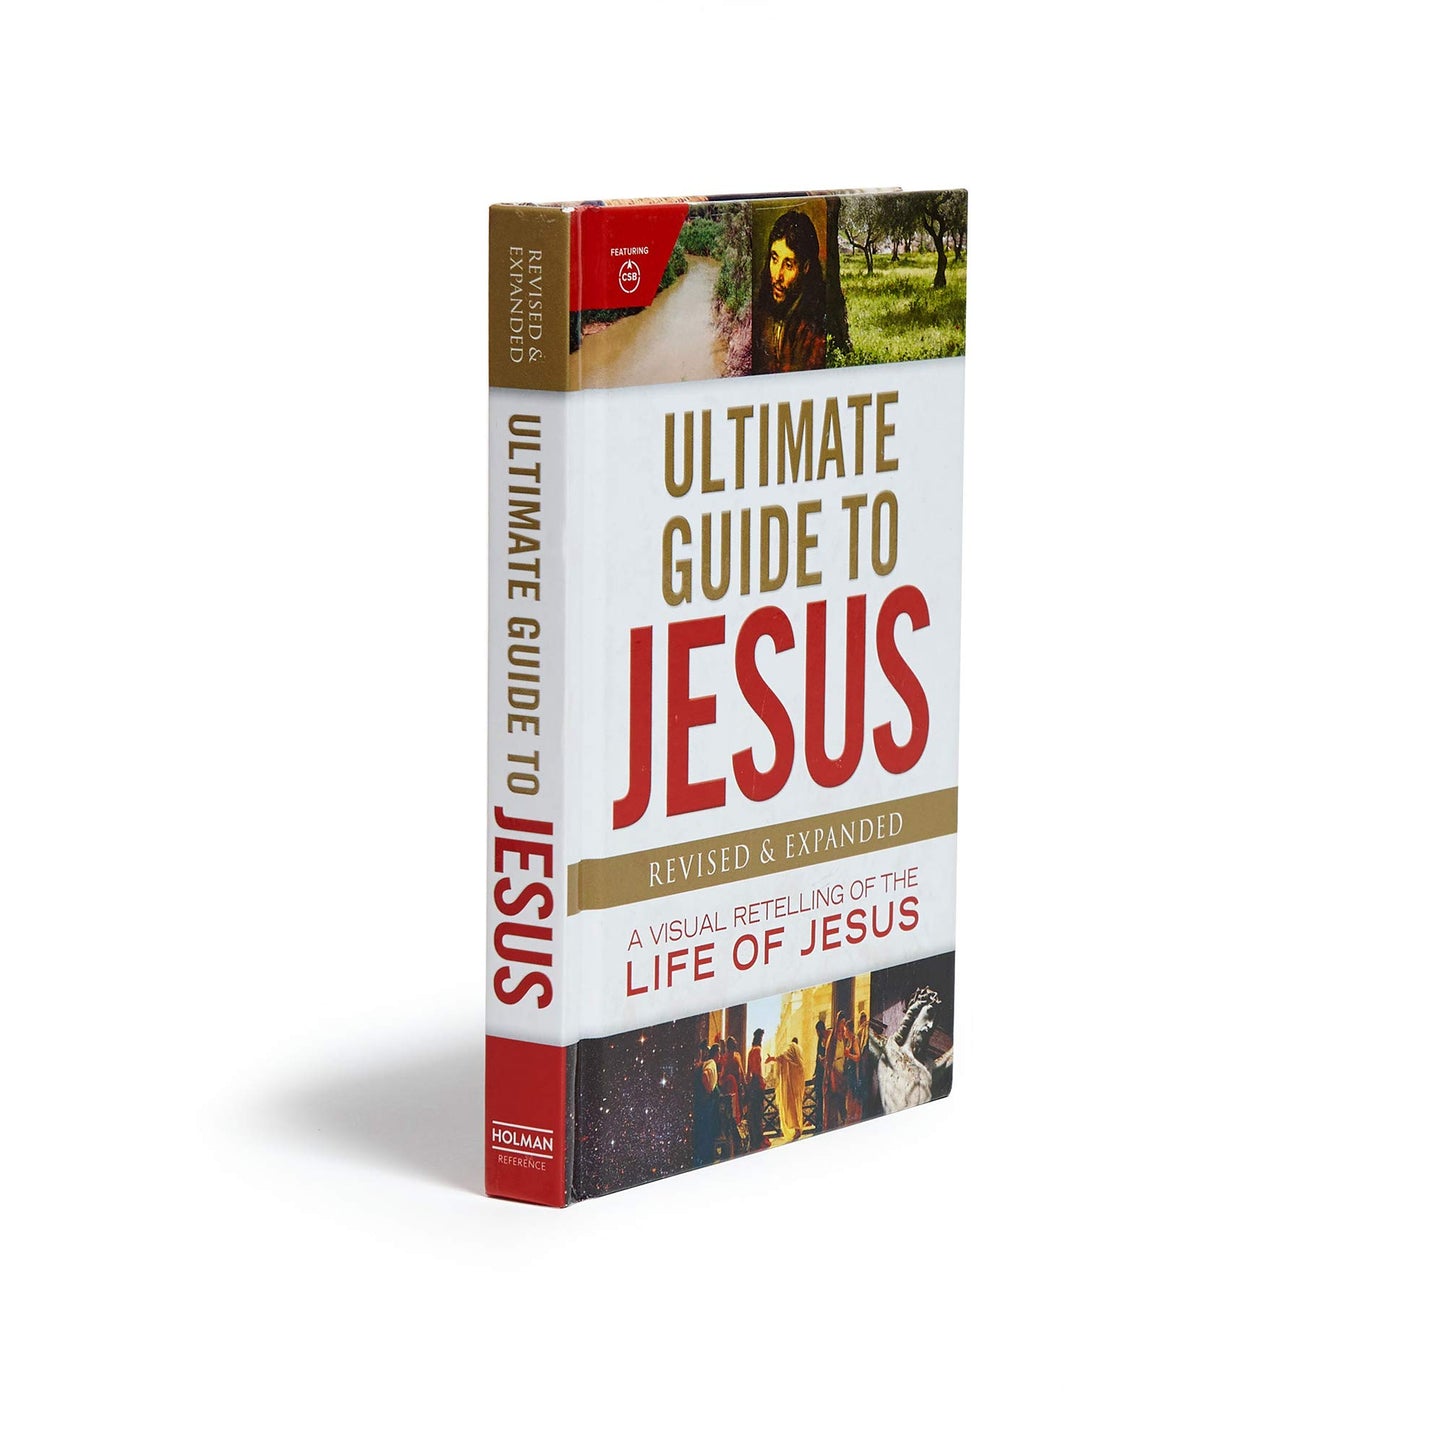 Ultimate Guide to Jesus - Visual Retelling of the Life of Jesus